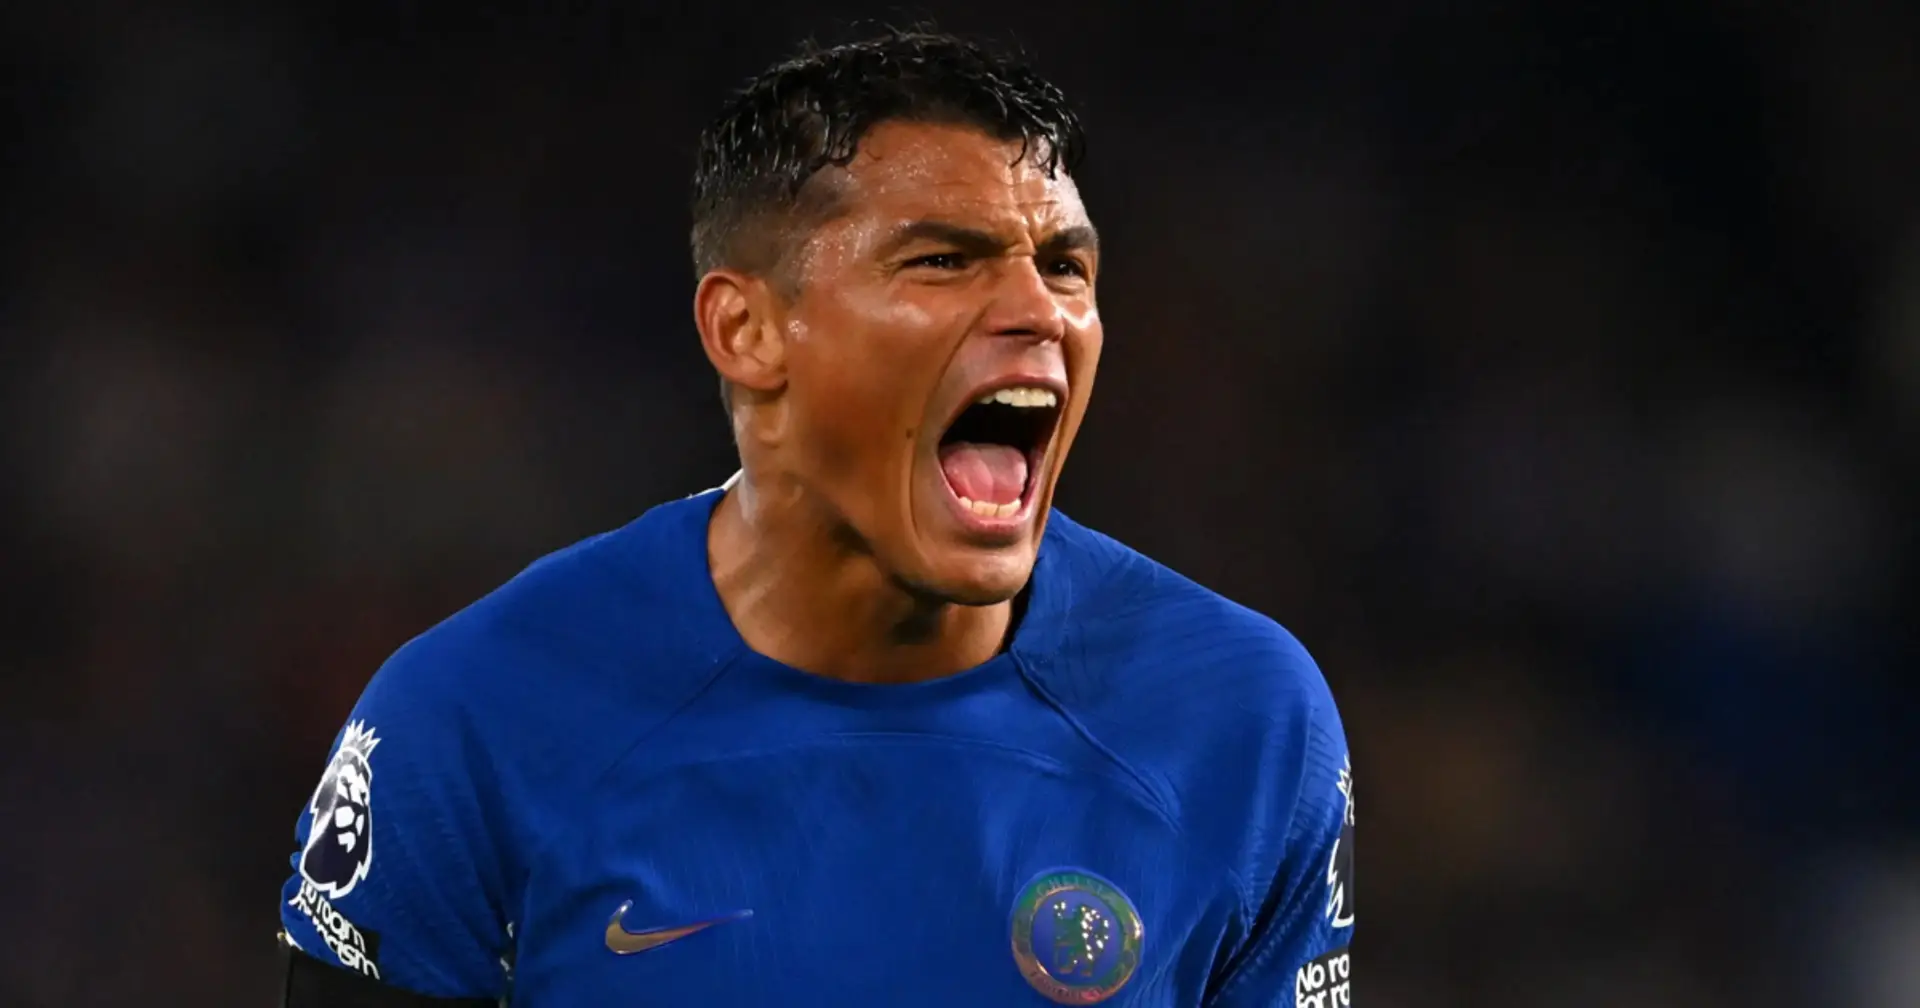 What's next for Thiago Silva after he leaves Chelsea?